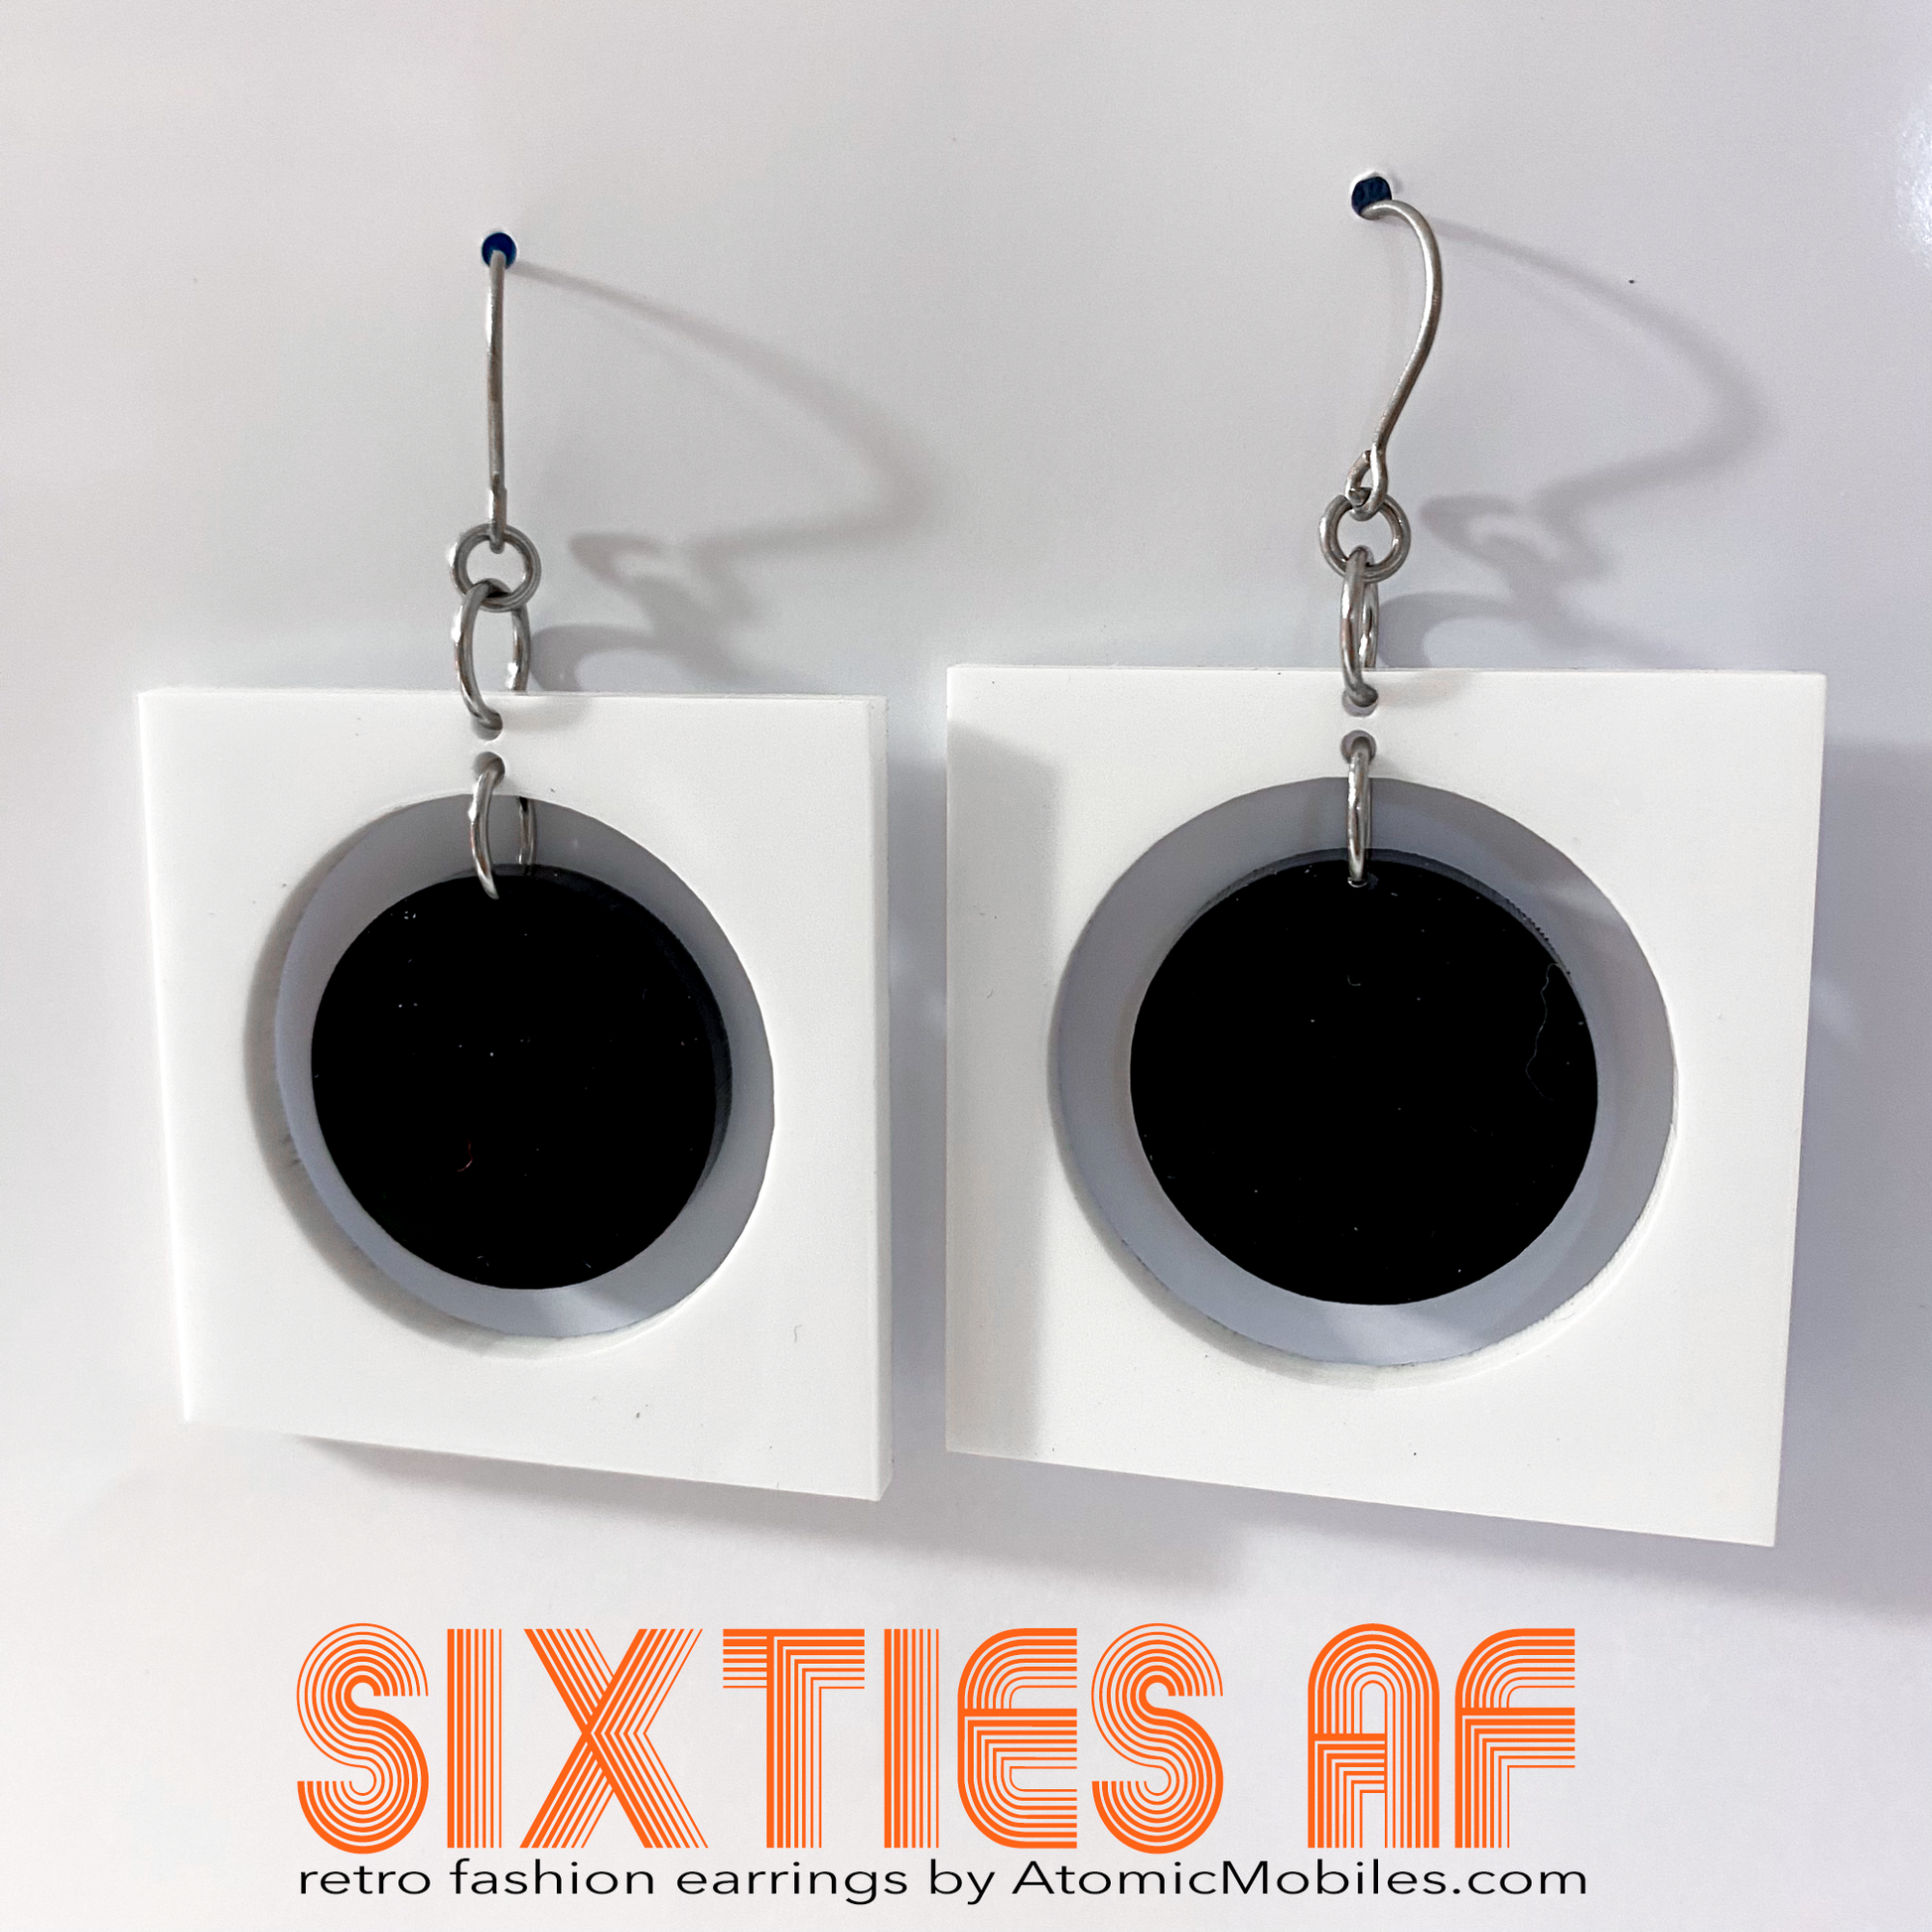 SIXTIES AF retro fashion earrings inspired by the 1960s in white and black - by AtomicMobiles.com